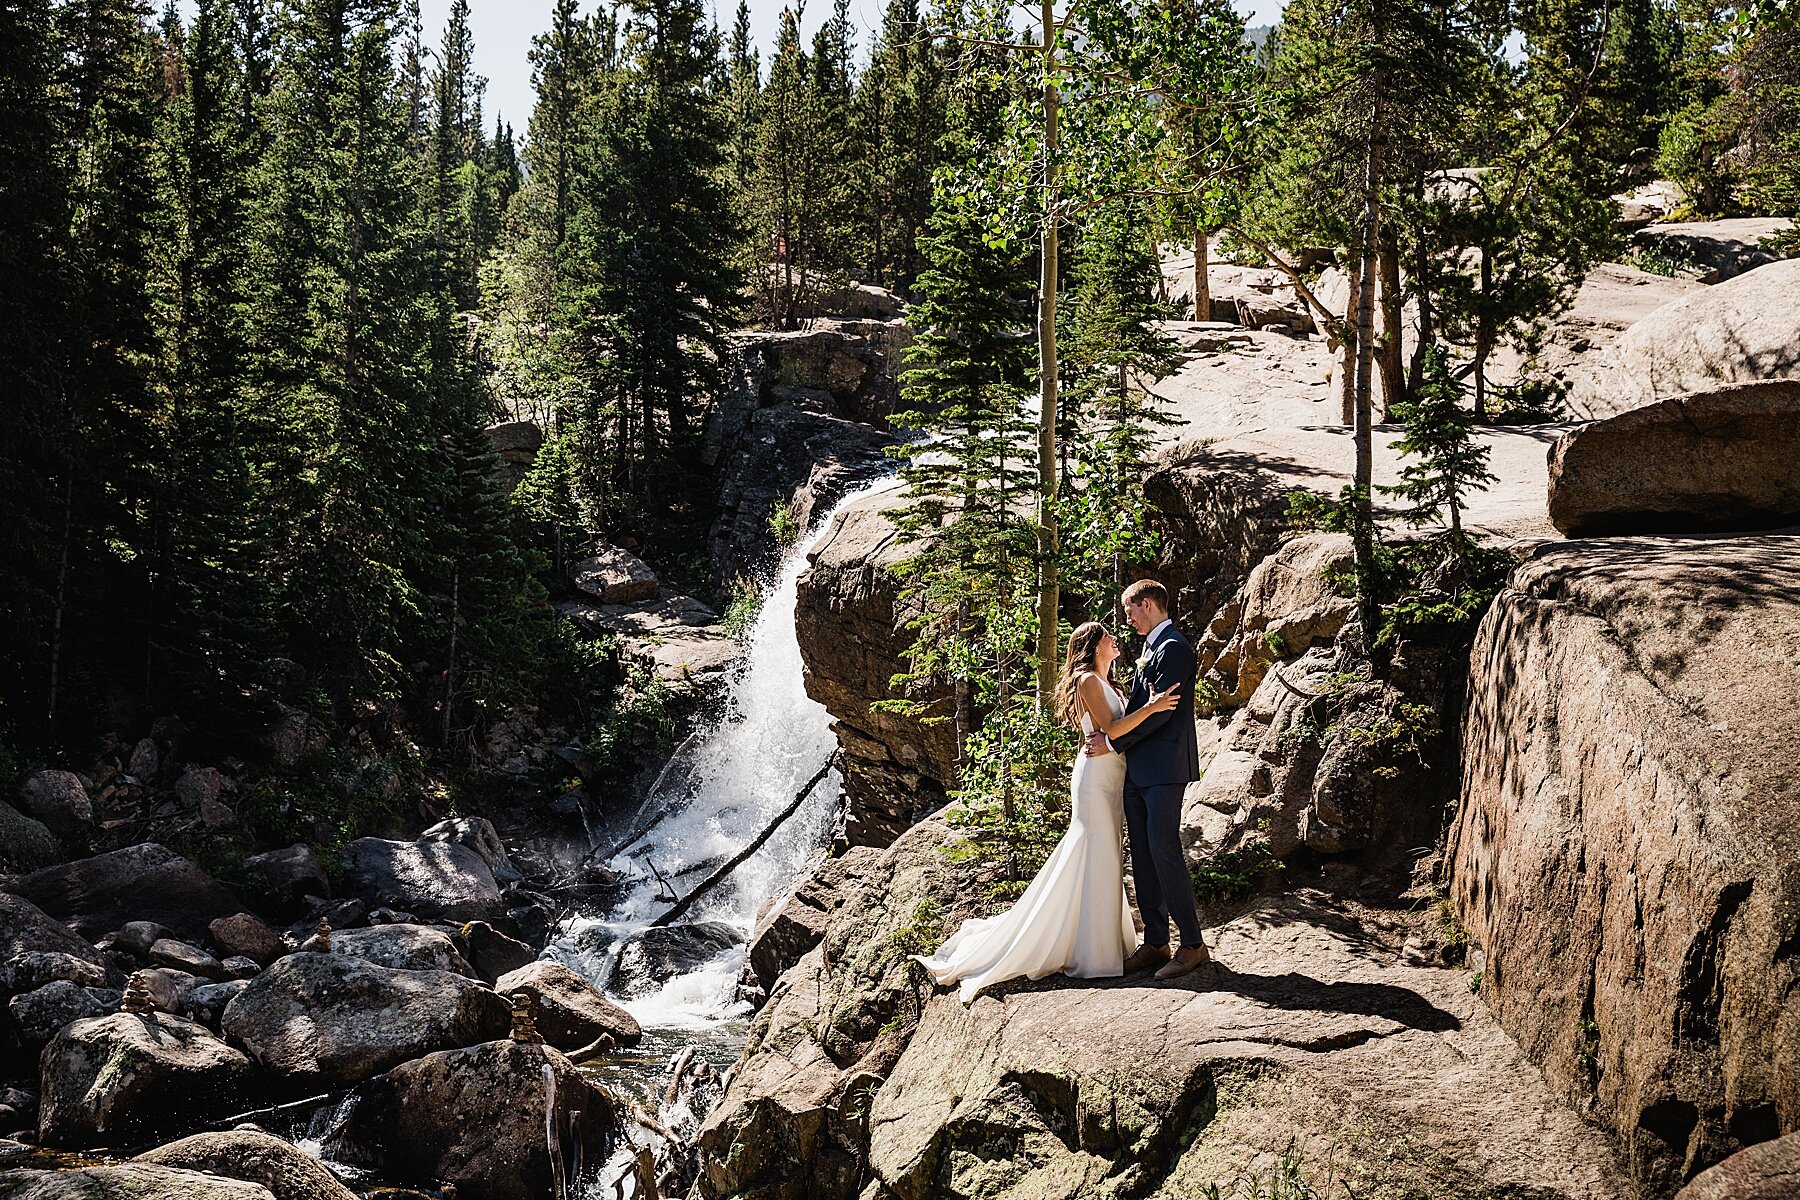 Sunrise Elopement at Sprague Lake in Rocky Mountain National Park | Colorado Elopement Photographer | Vow of the Wild